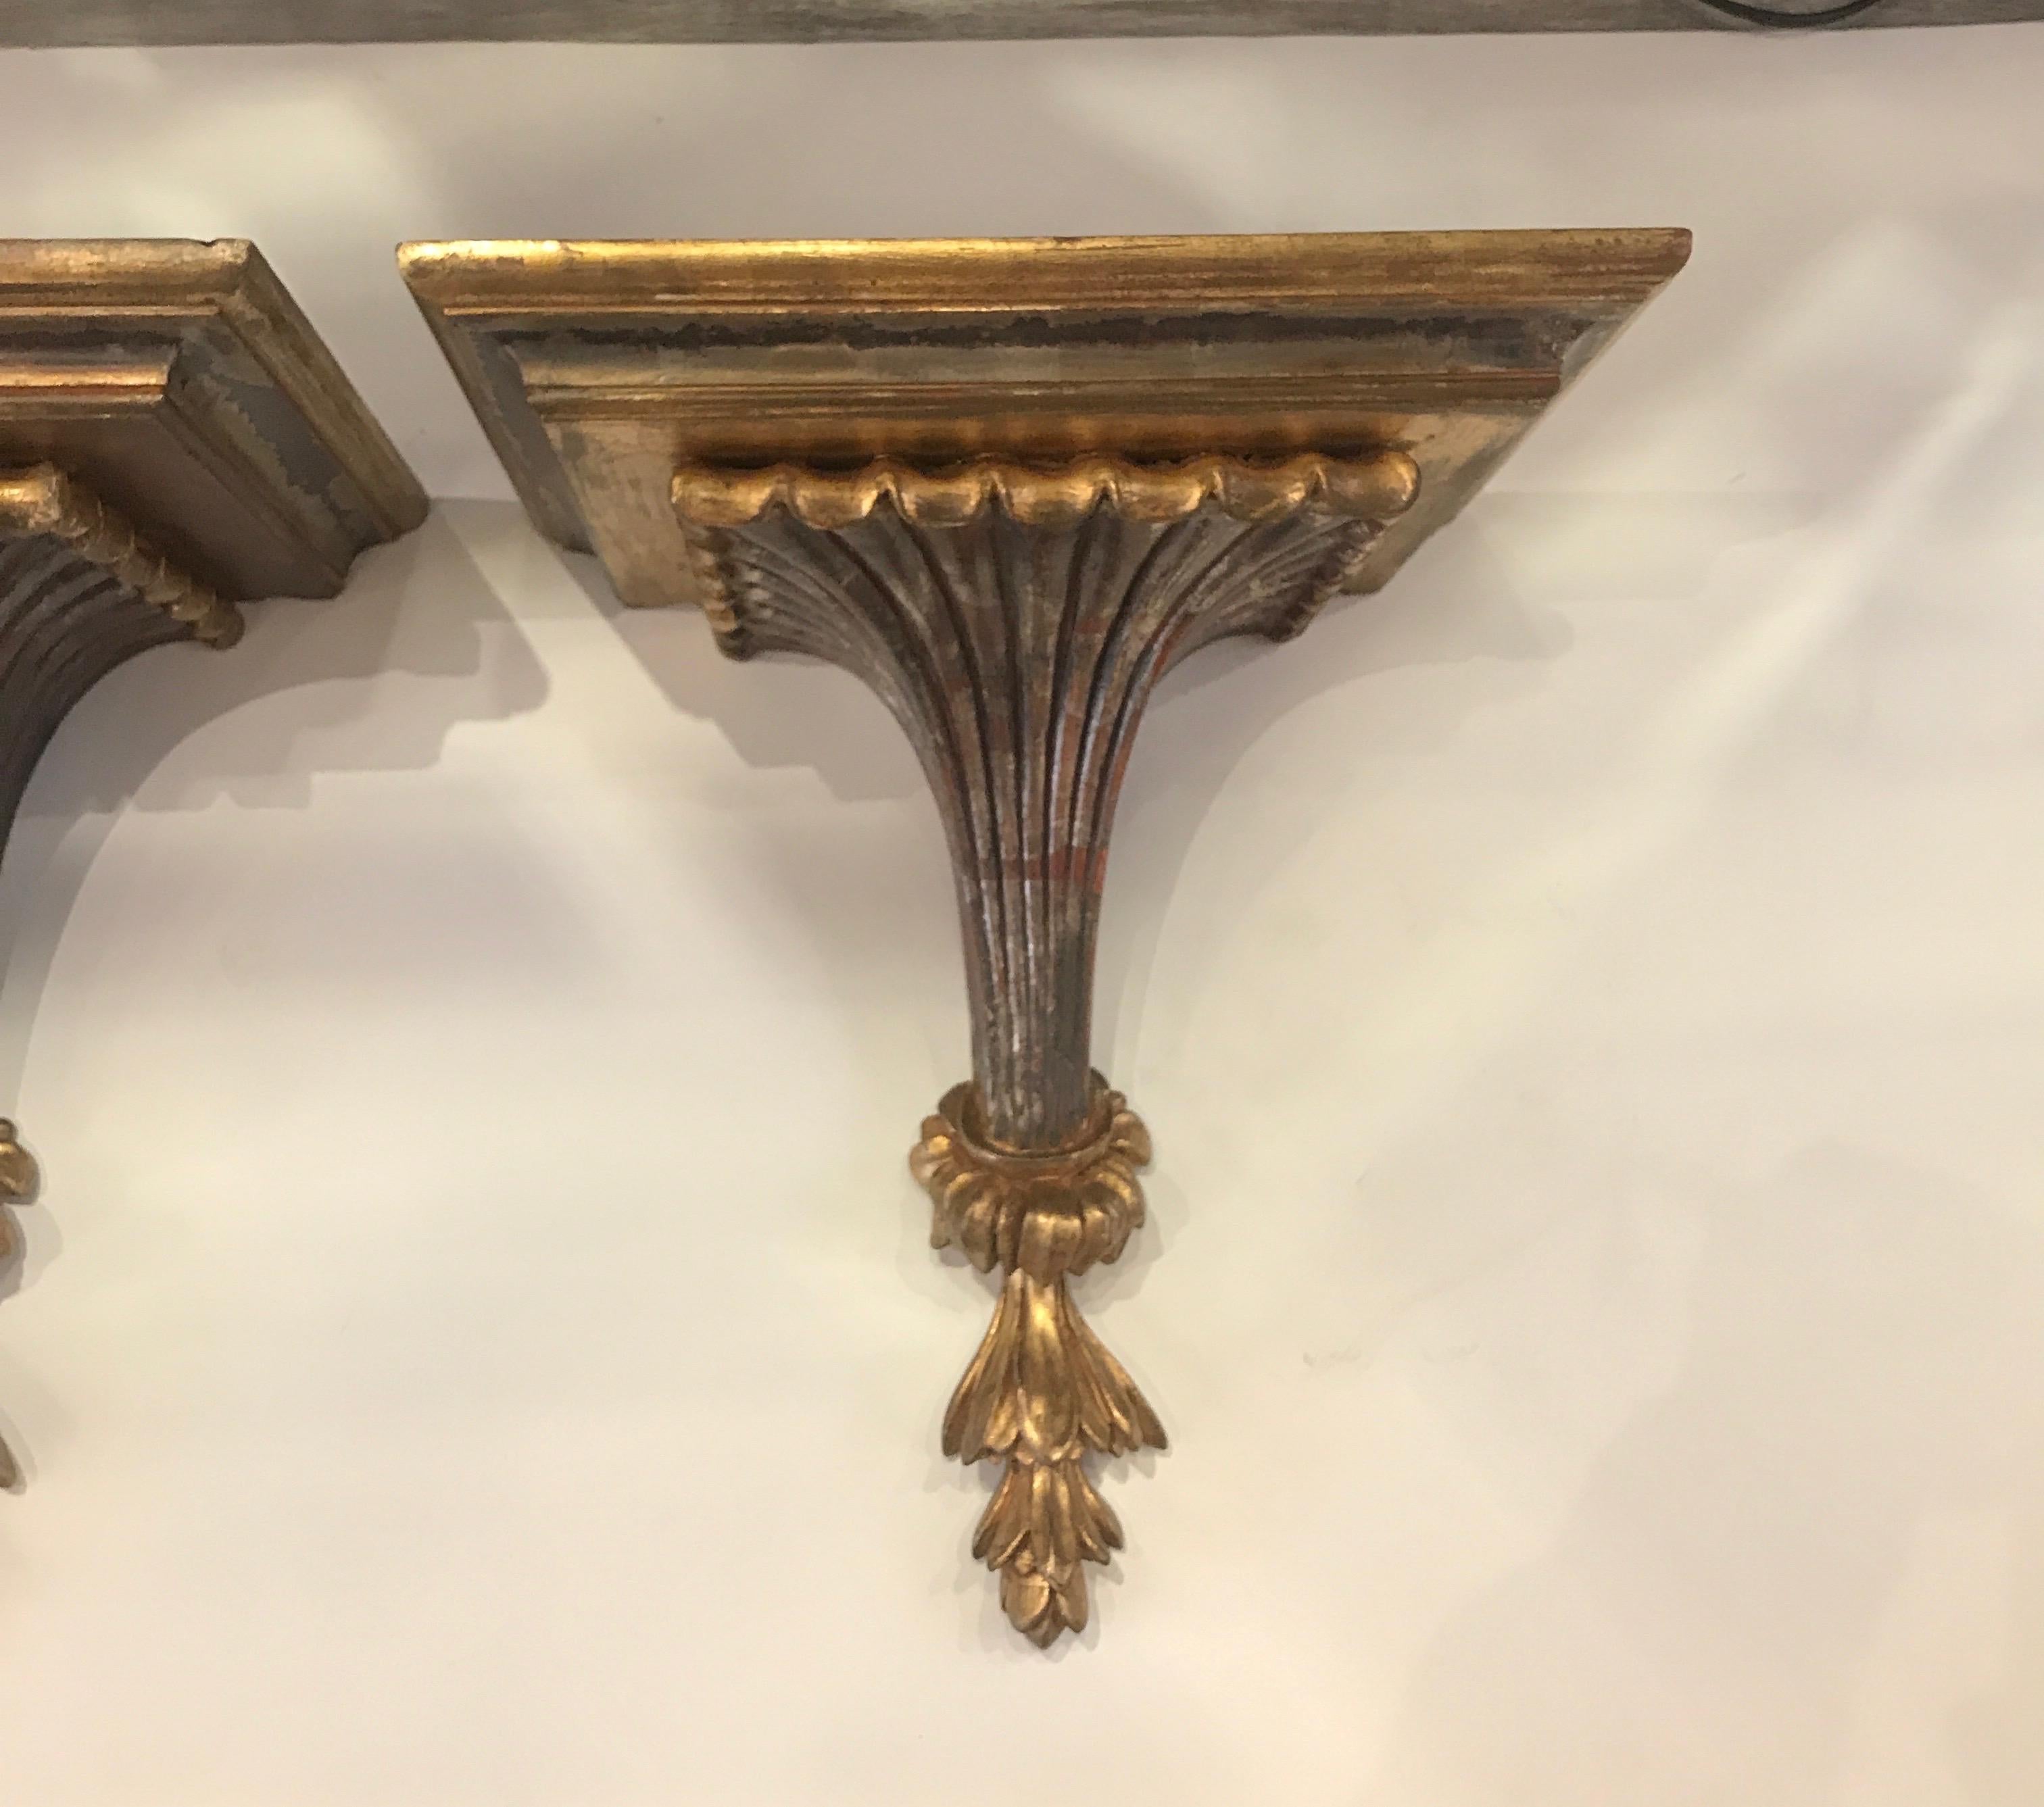 A pair of decorator carved Italian giltwood wall shelves. The generous sized top supported by fluted base. The top measures 12.5 wide, 9 deep with a height of 15.